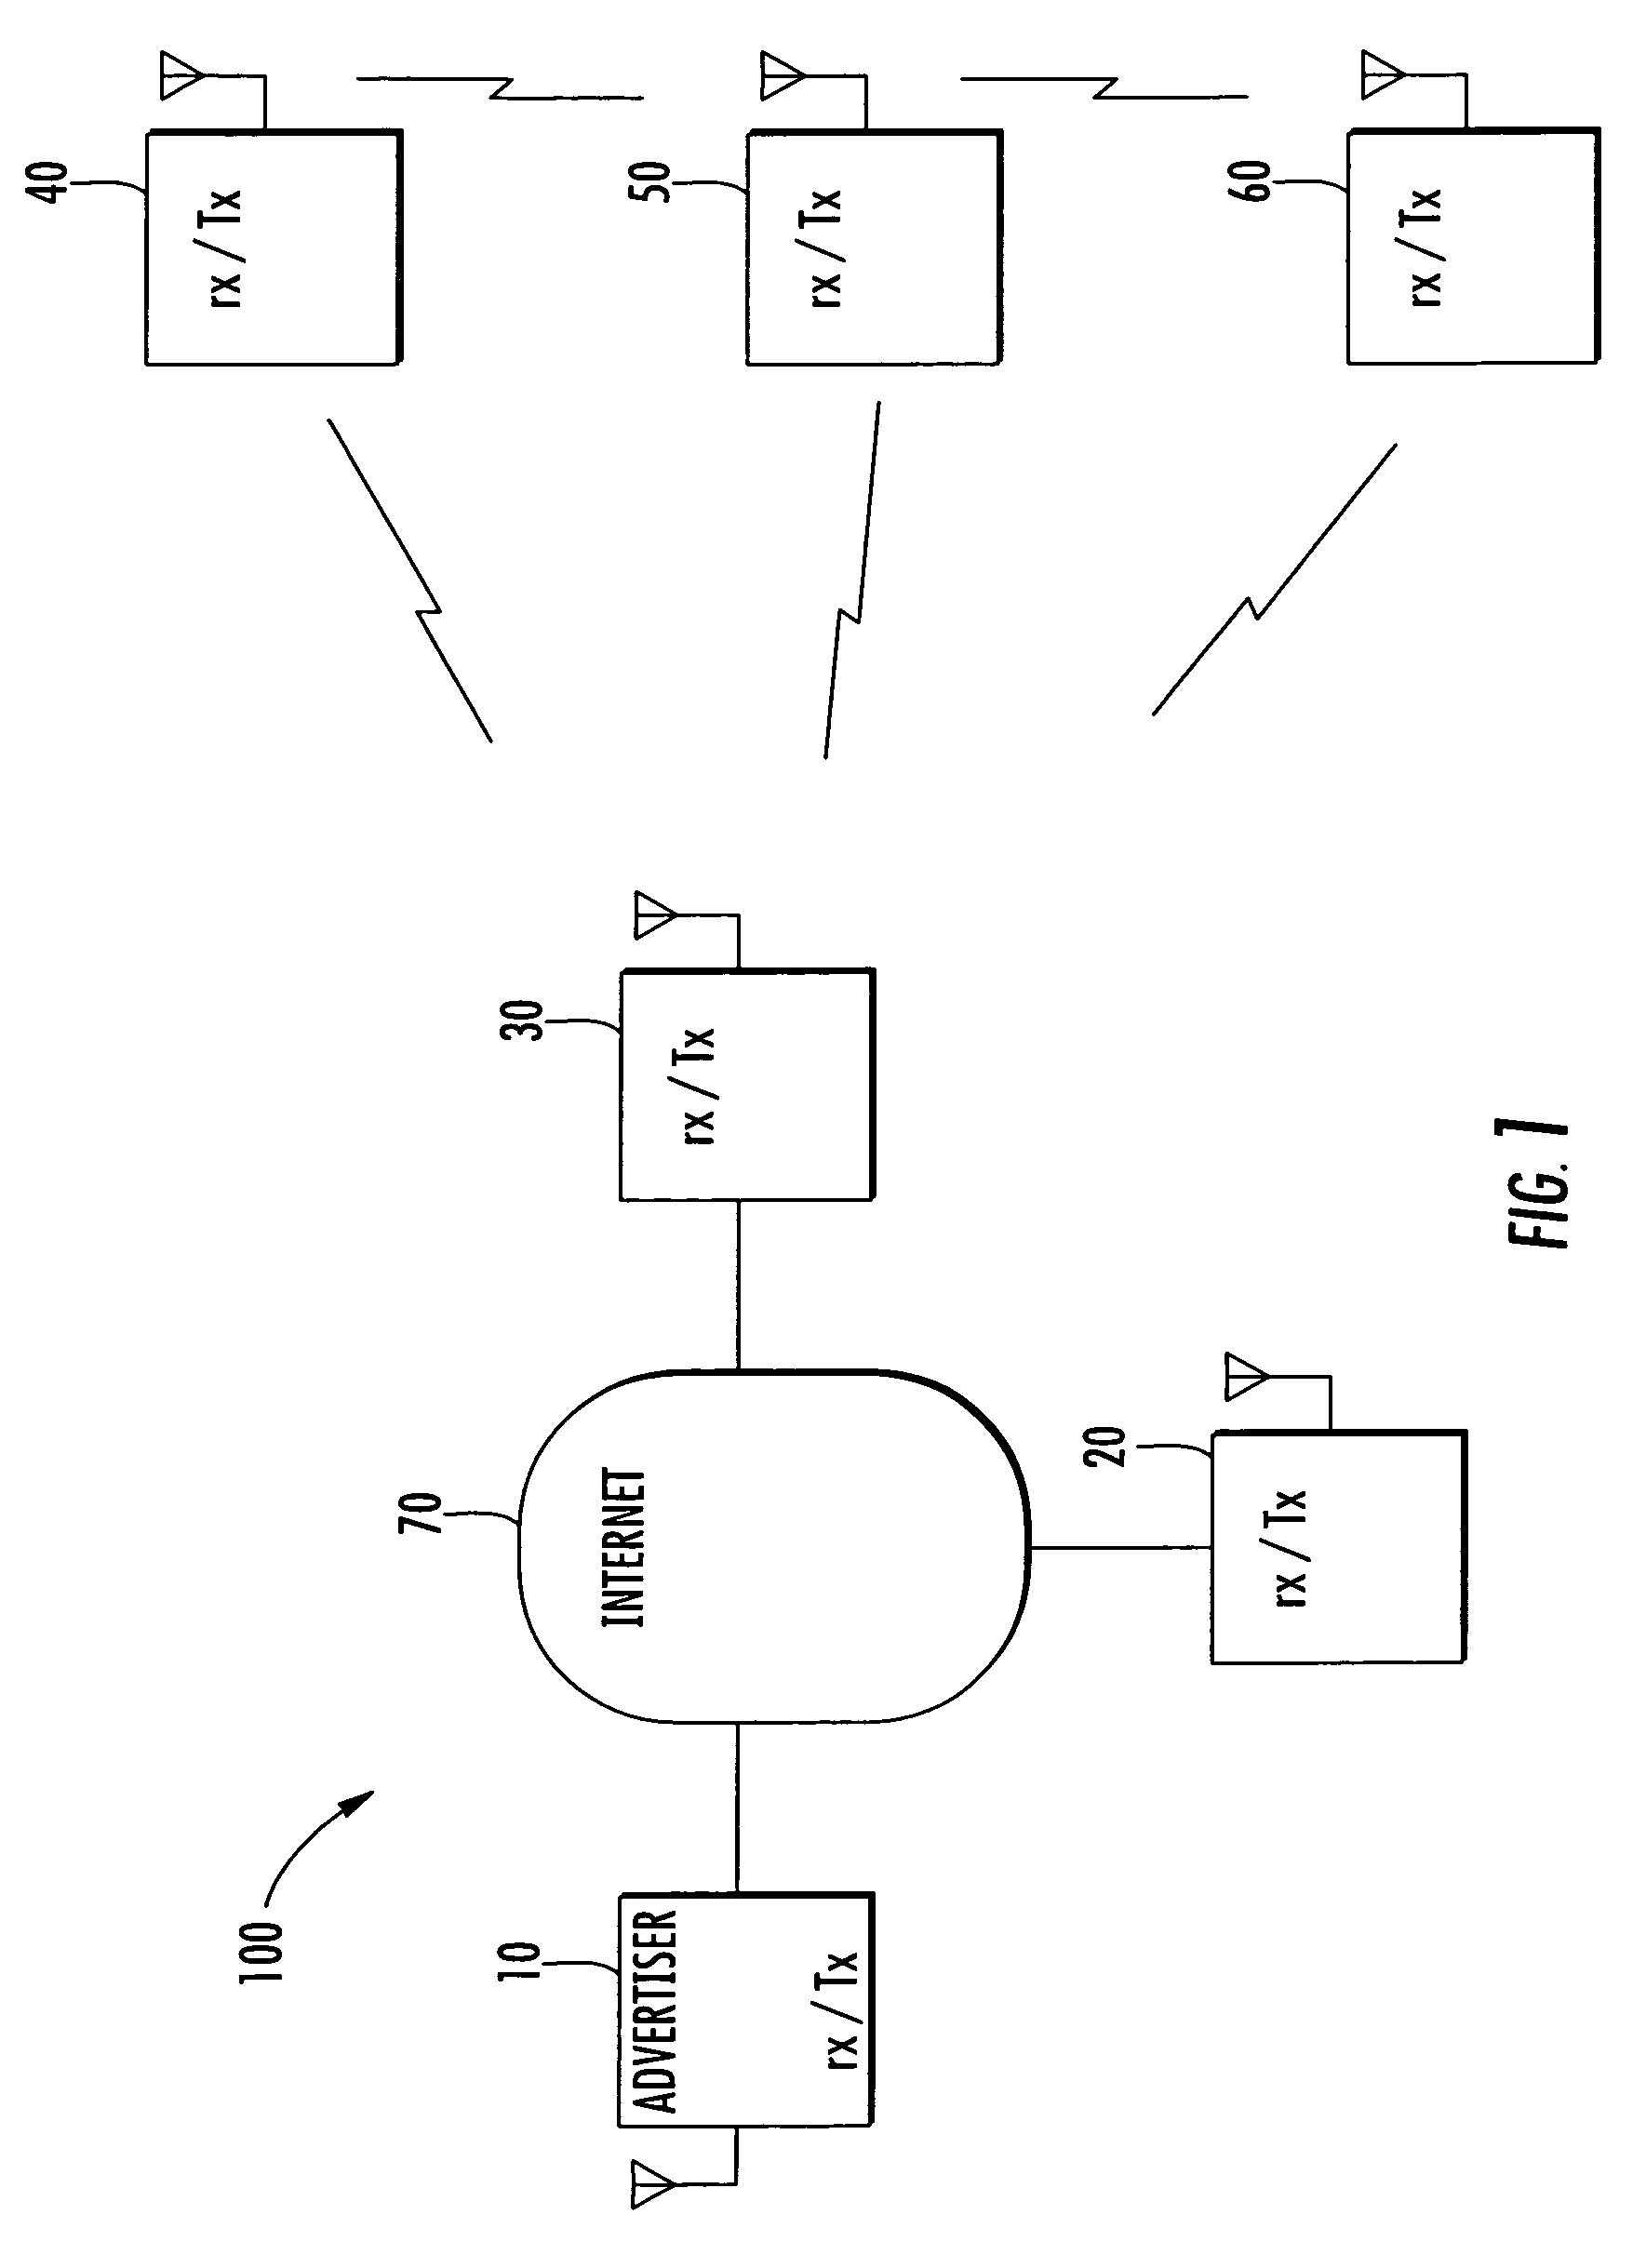 Advertising system and method of use